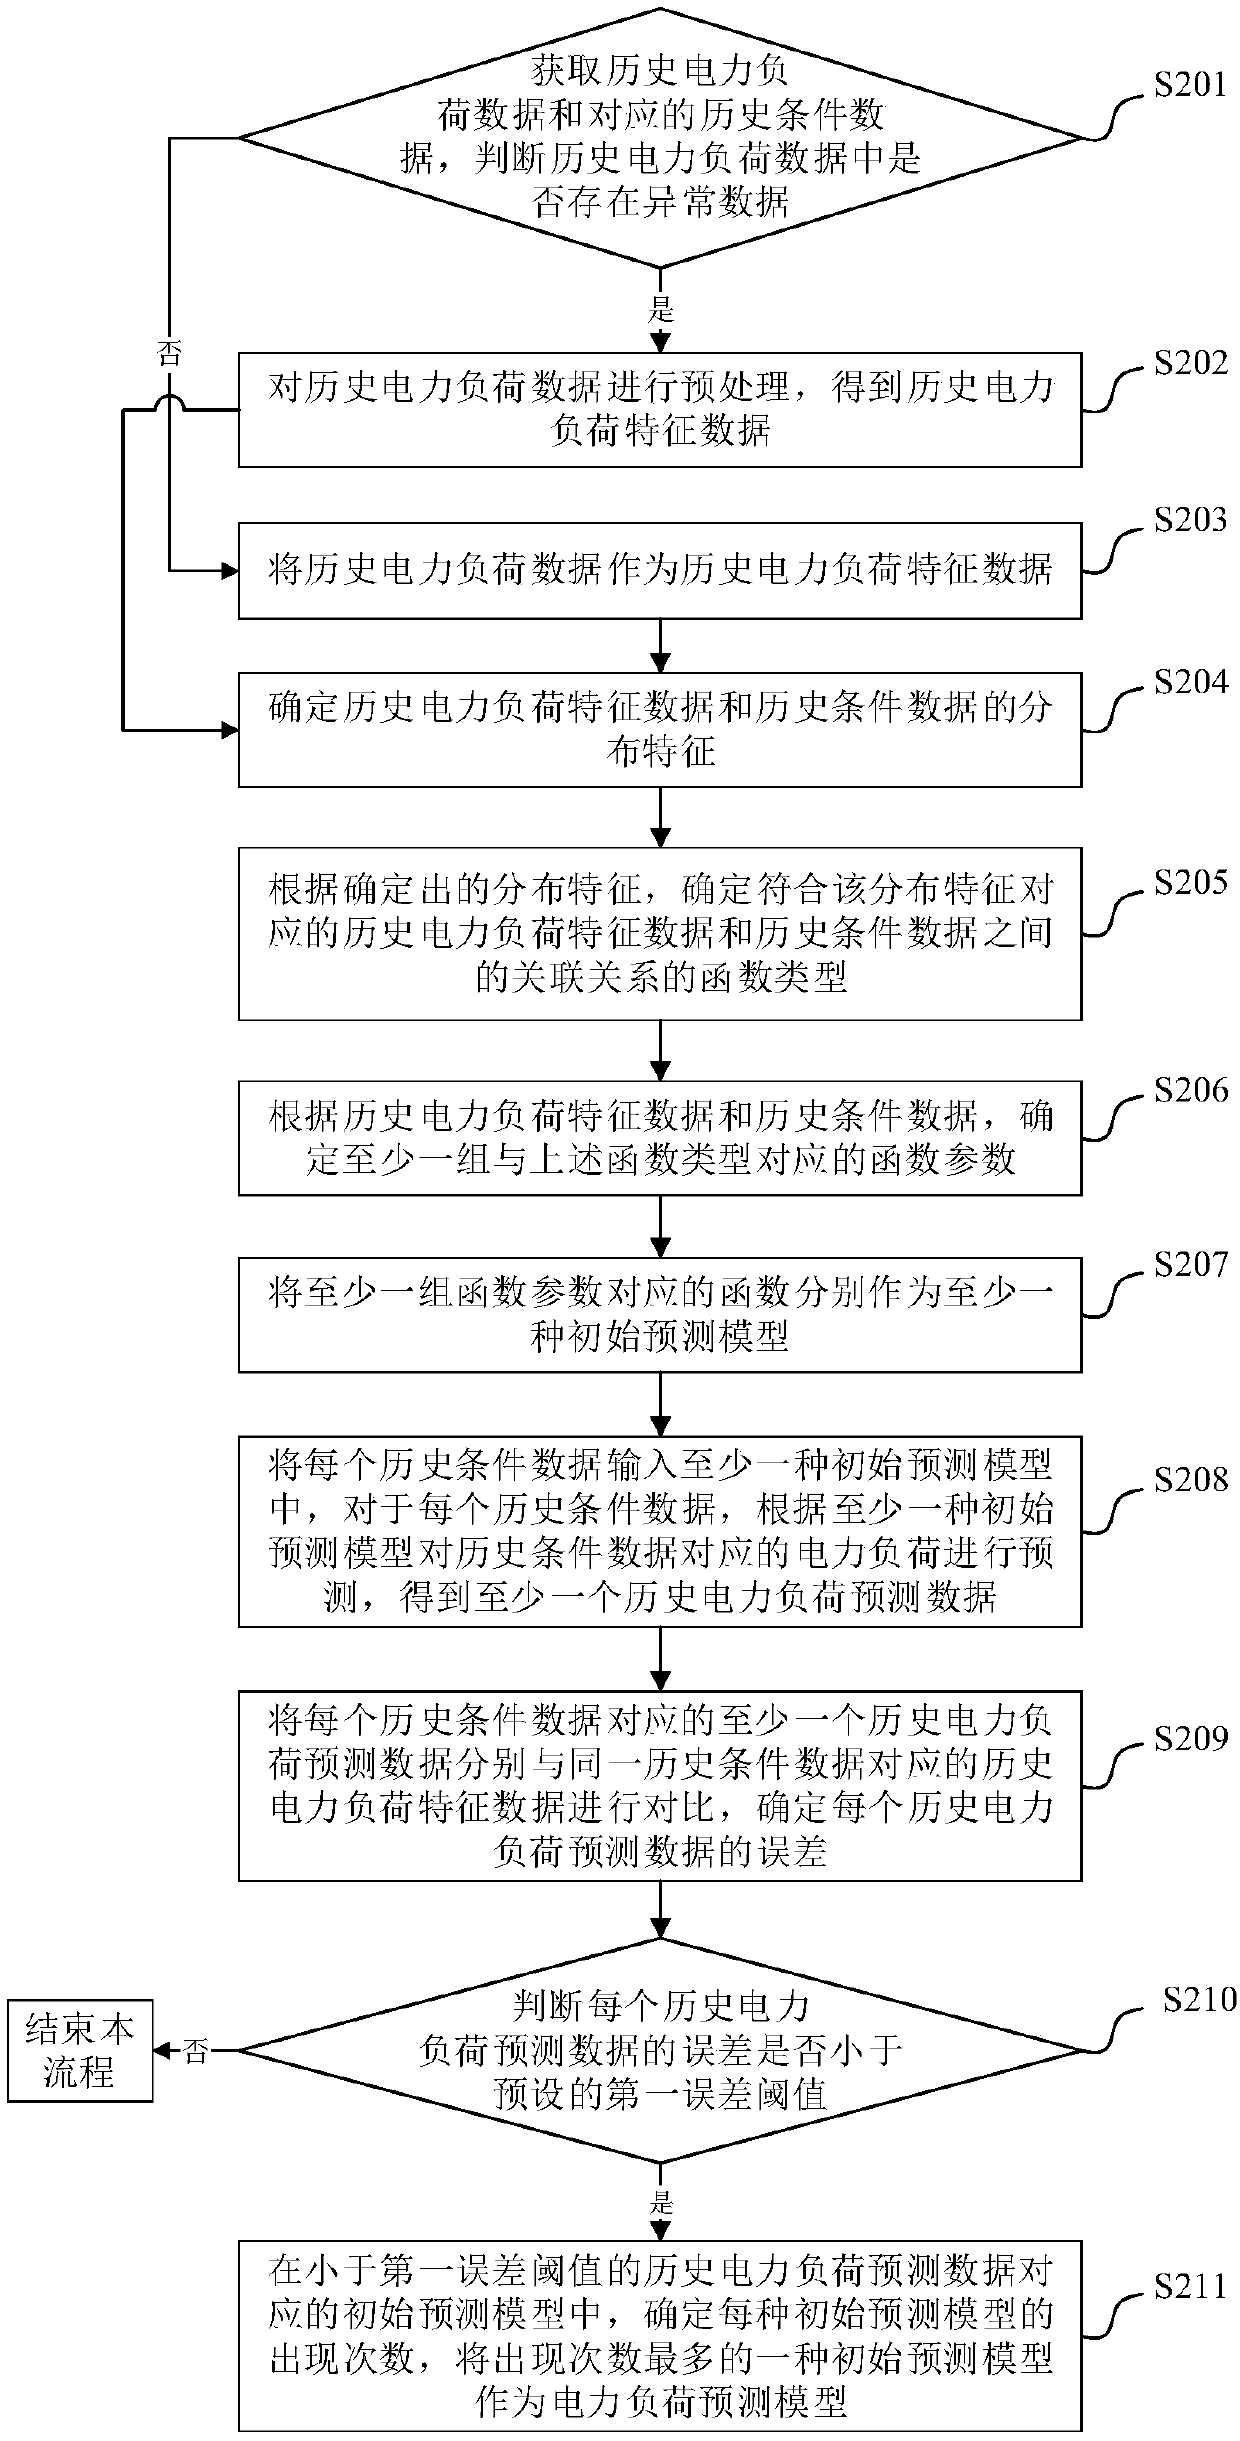 Load prediction model creation method and device, and power load prediction method and device